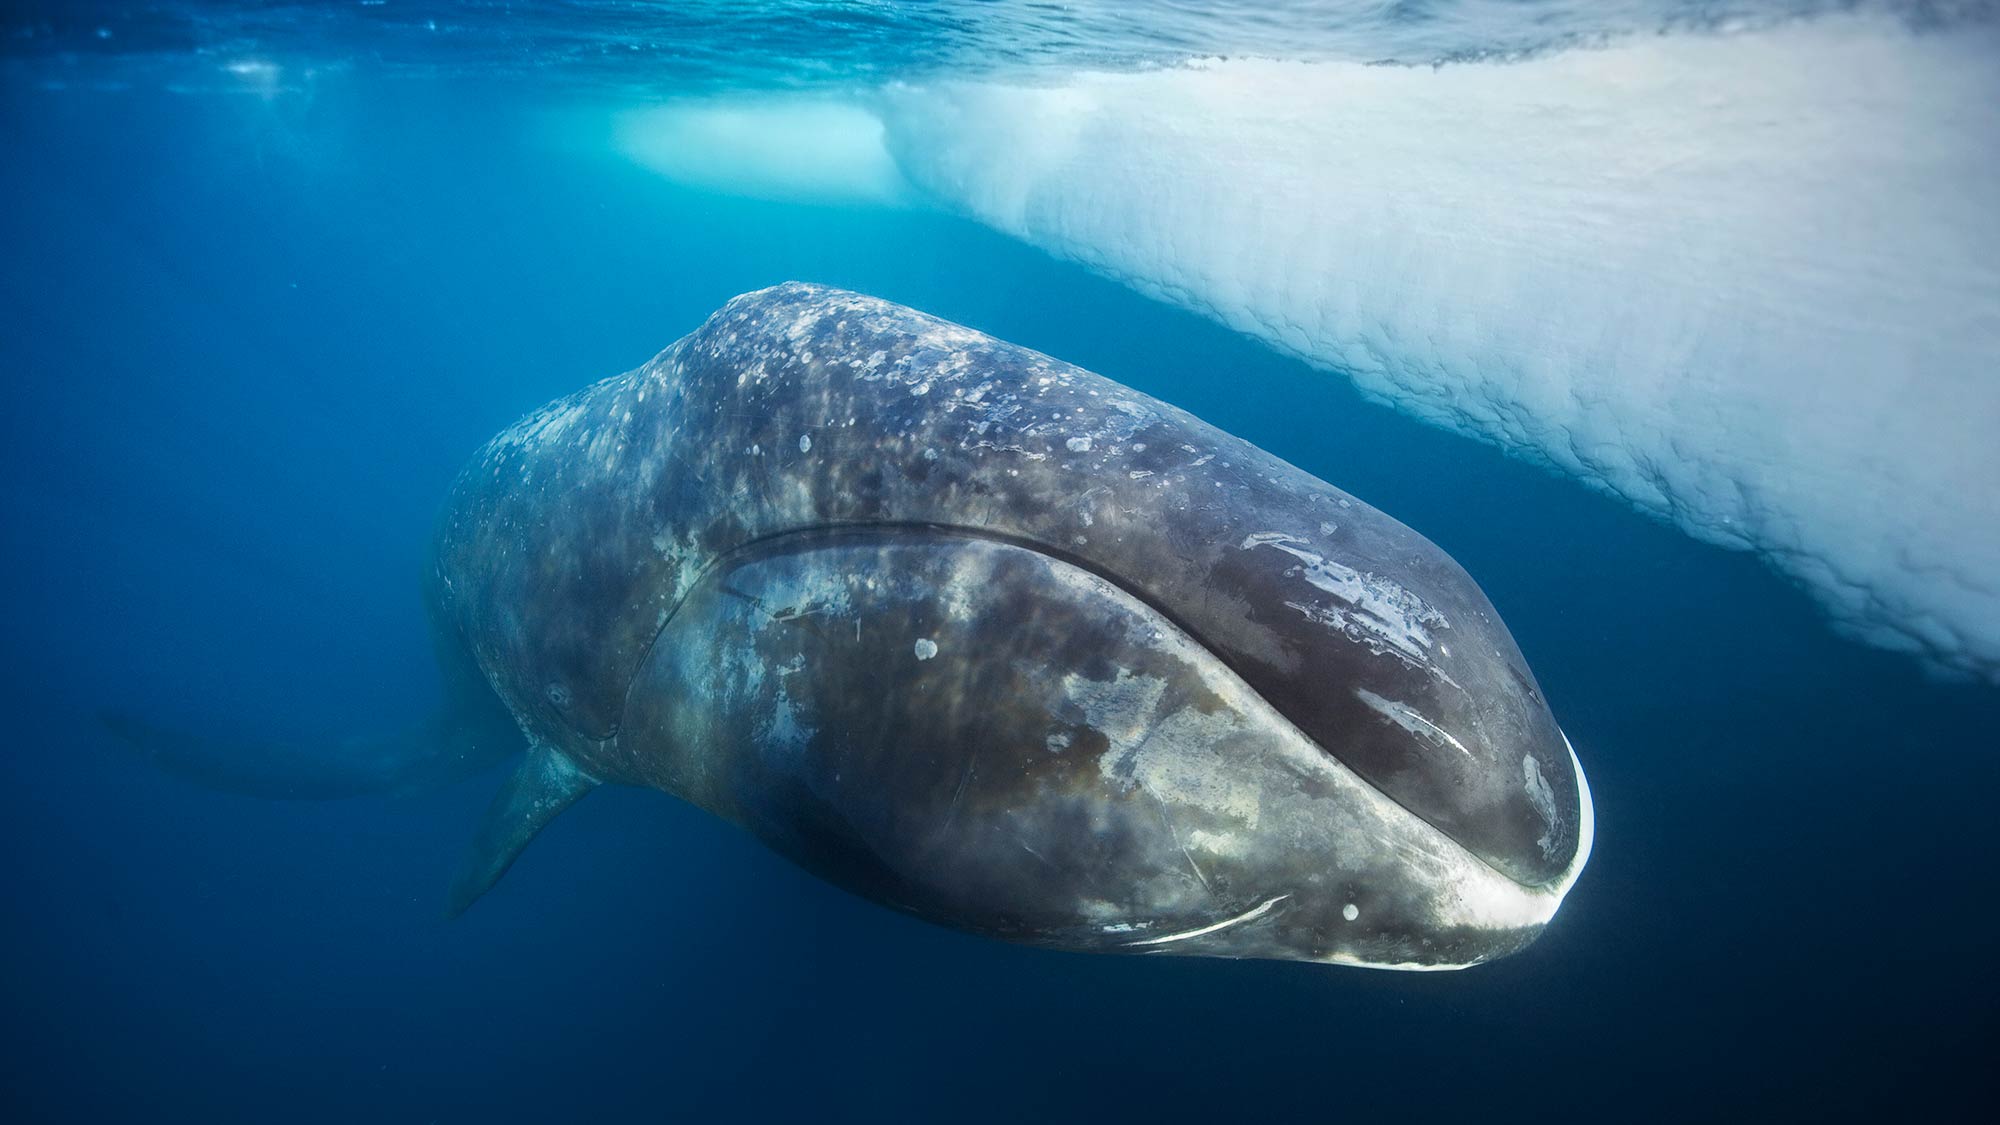 After feeding, a bowhead whale comes to the surface to rest. Lancaster Sound, Northwest Territories, Canada. Photo: Paul Nicklen/Getty Images